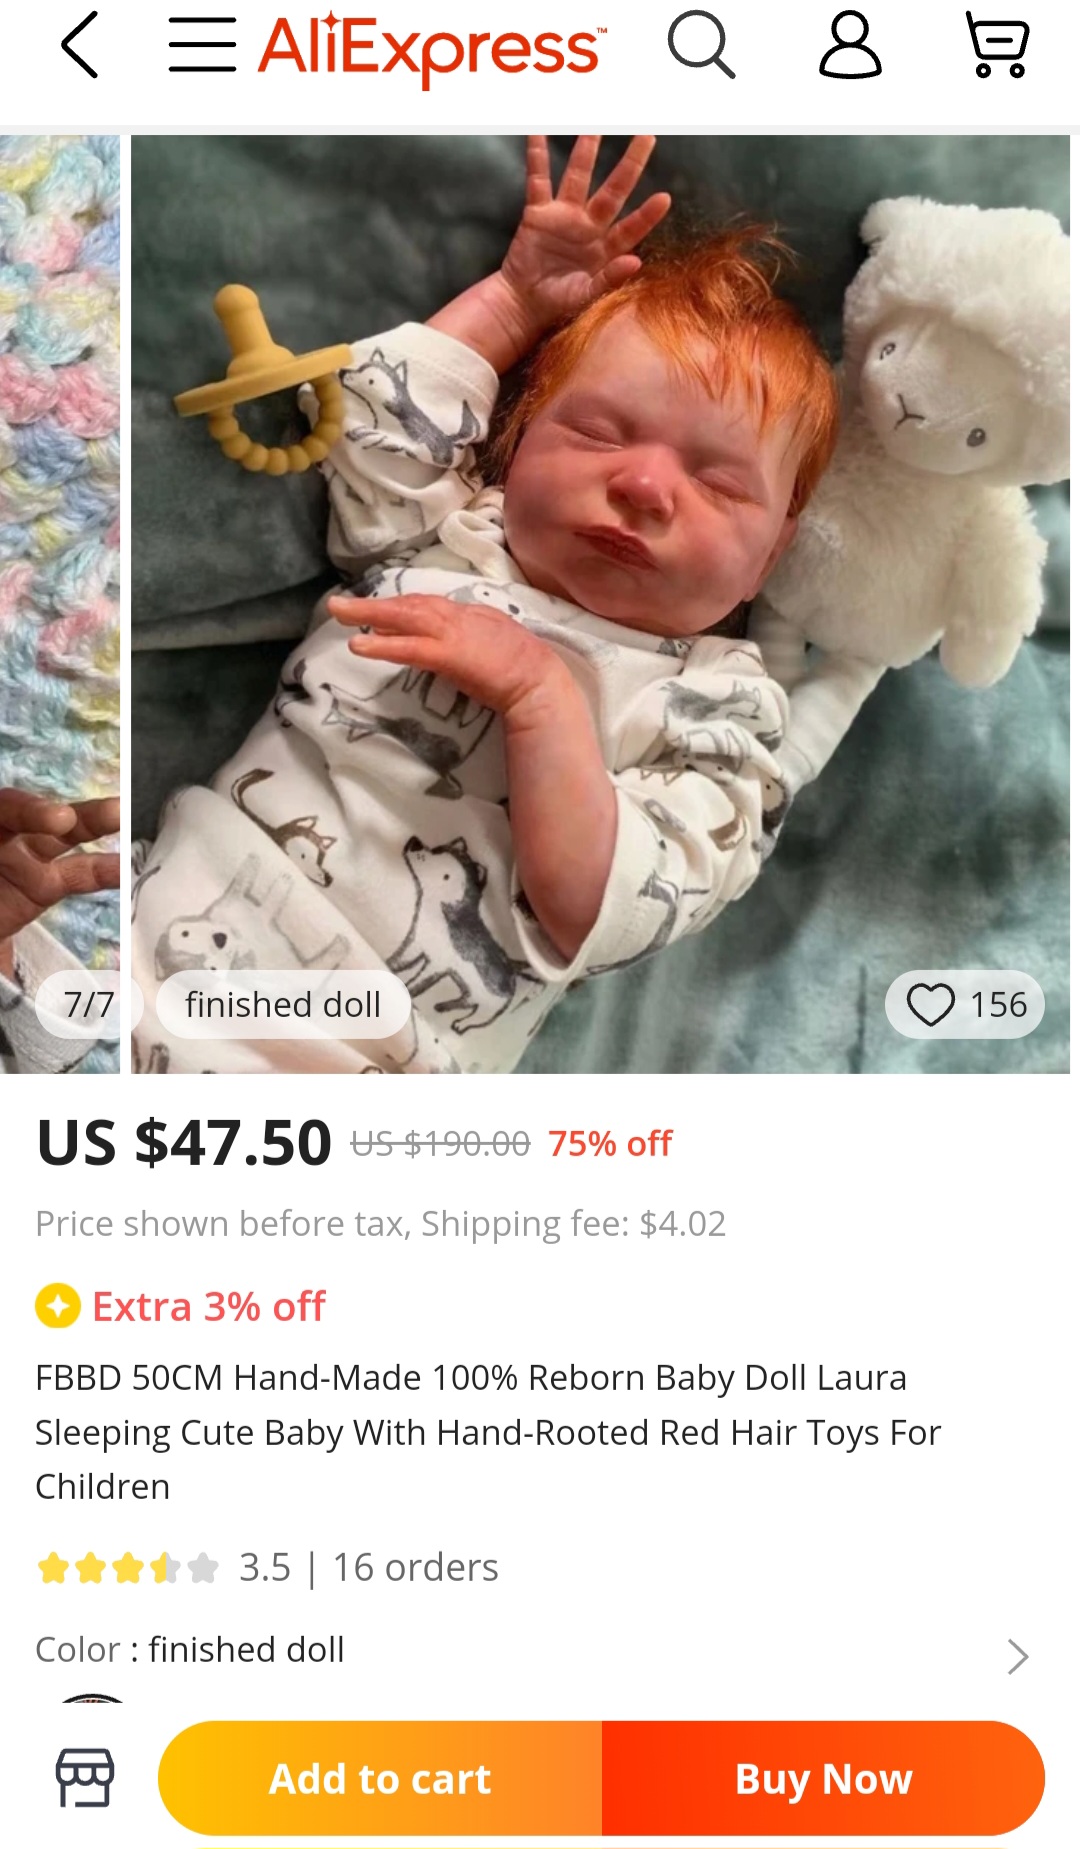 Site showing it is a premade doll. Same photos!